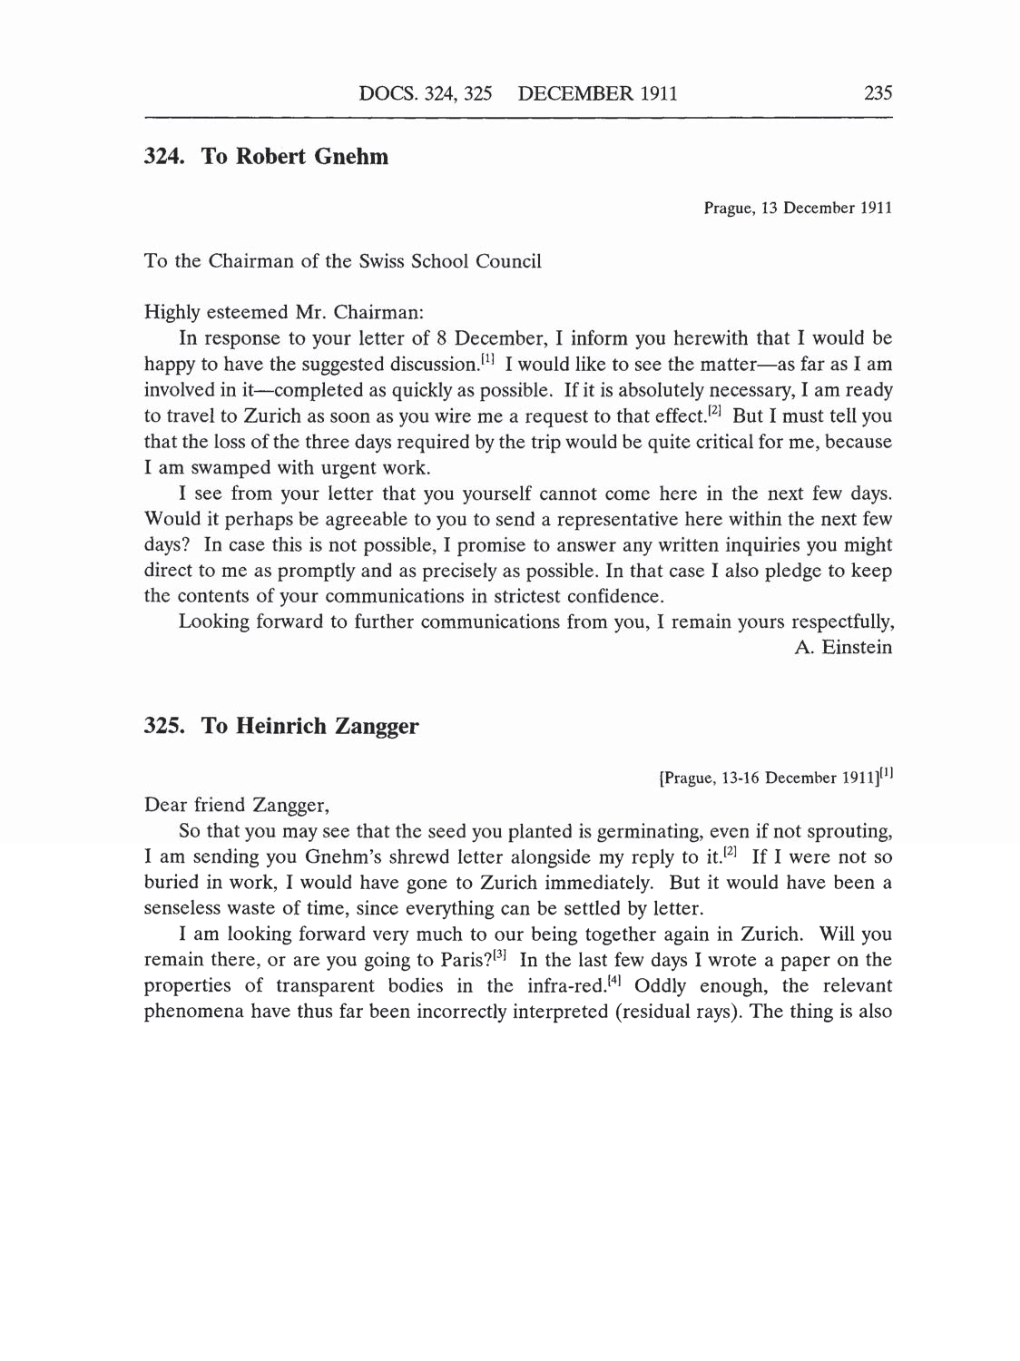 Volume 5: The Swiss Years: Correspondence, 1902-1914 (English translation supplement) page 235